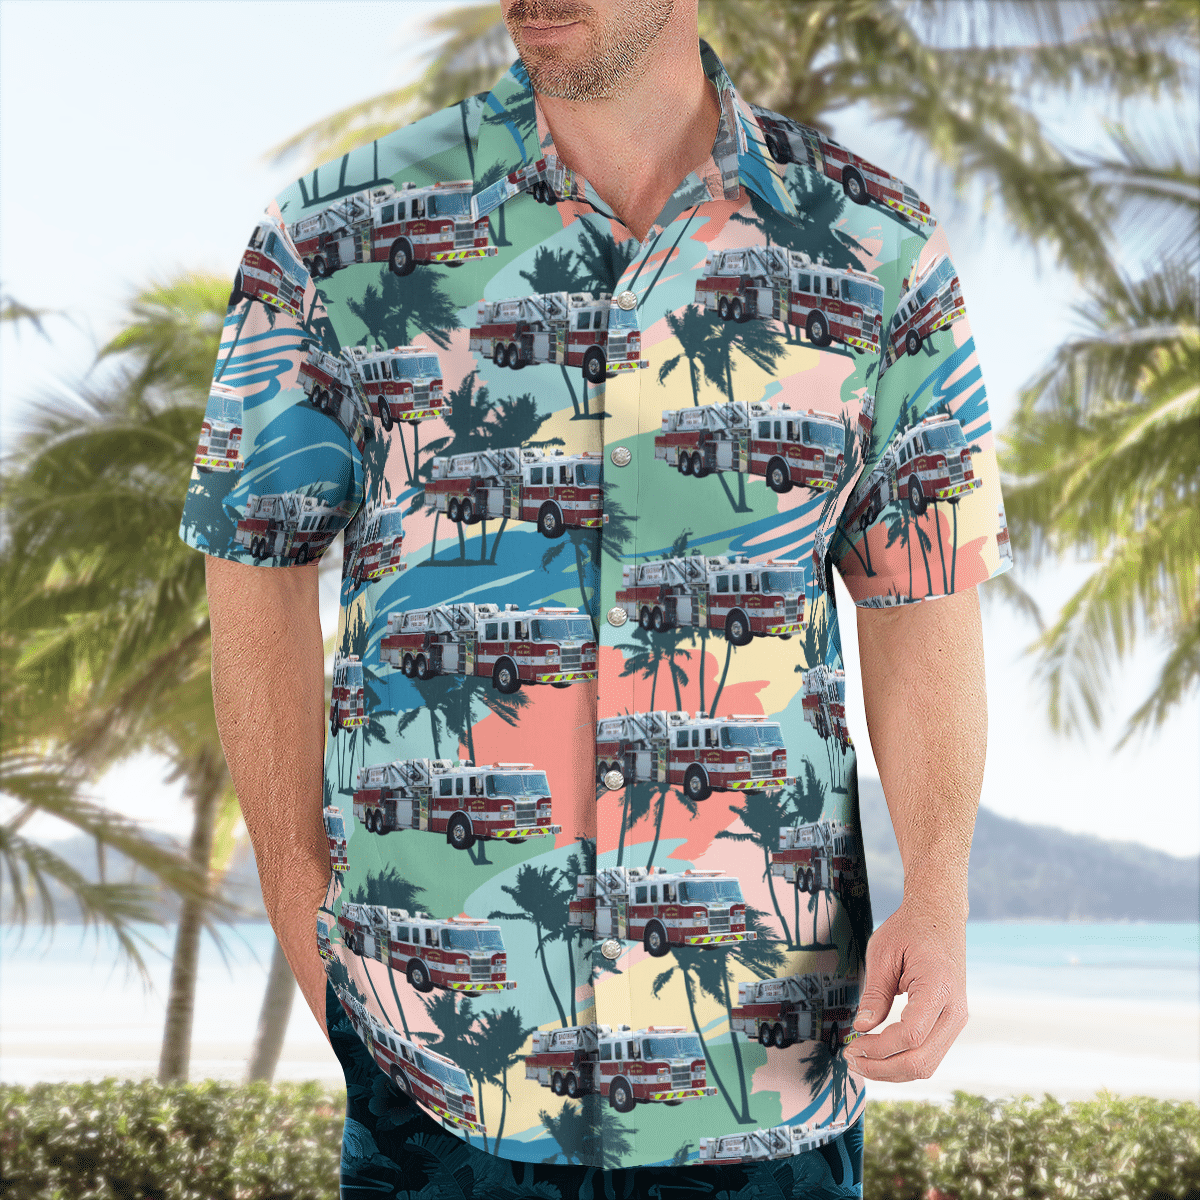 There are several styles of beach and Hawaiian shorts and tops to choose from 126